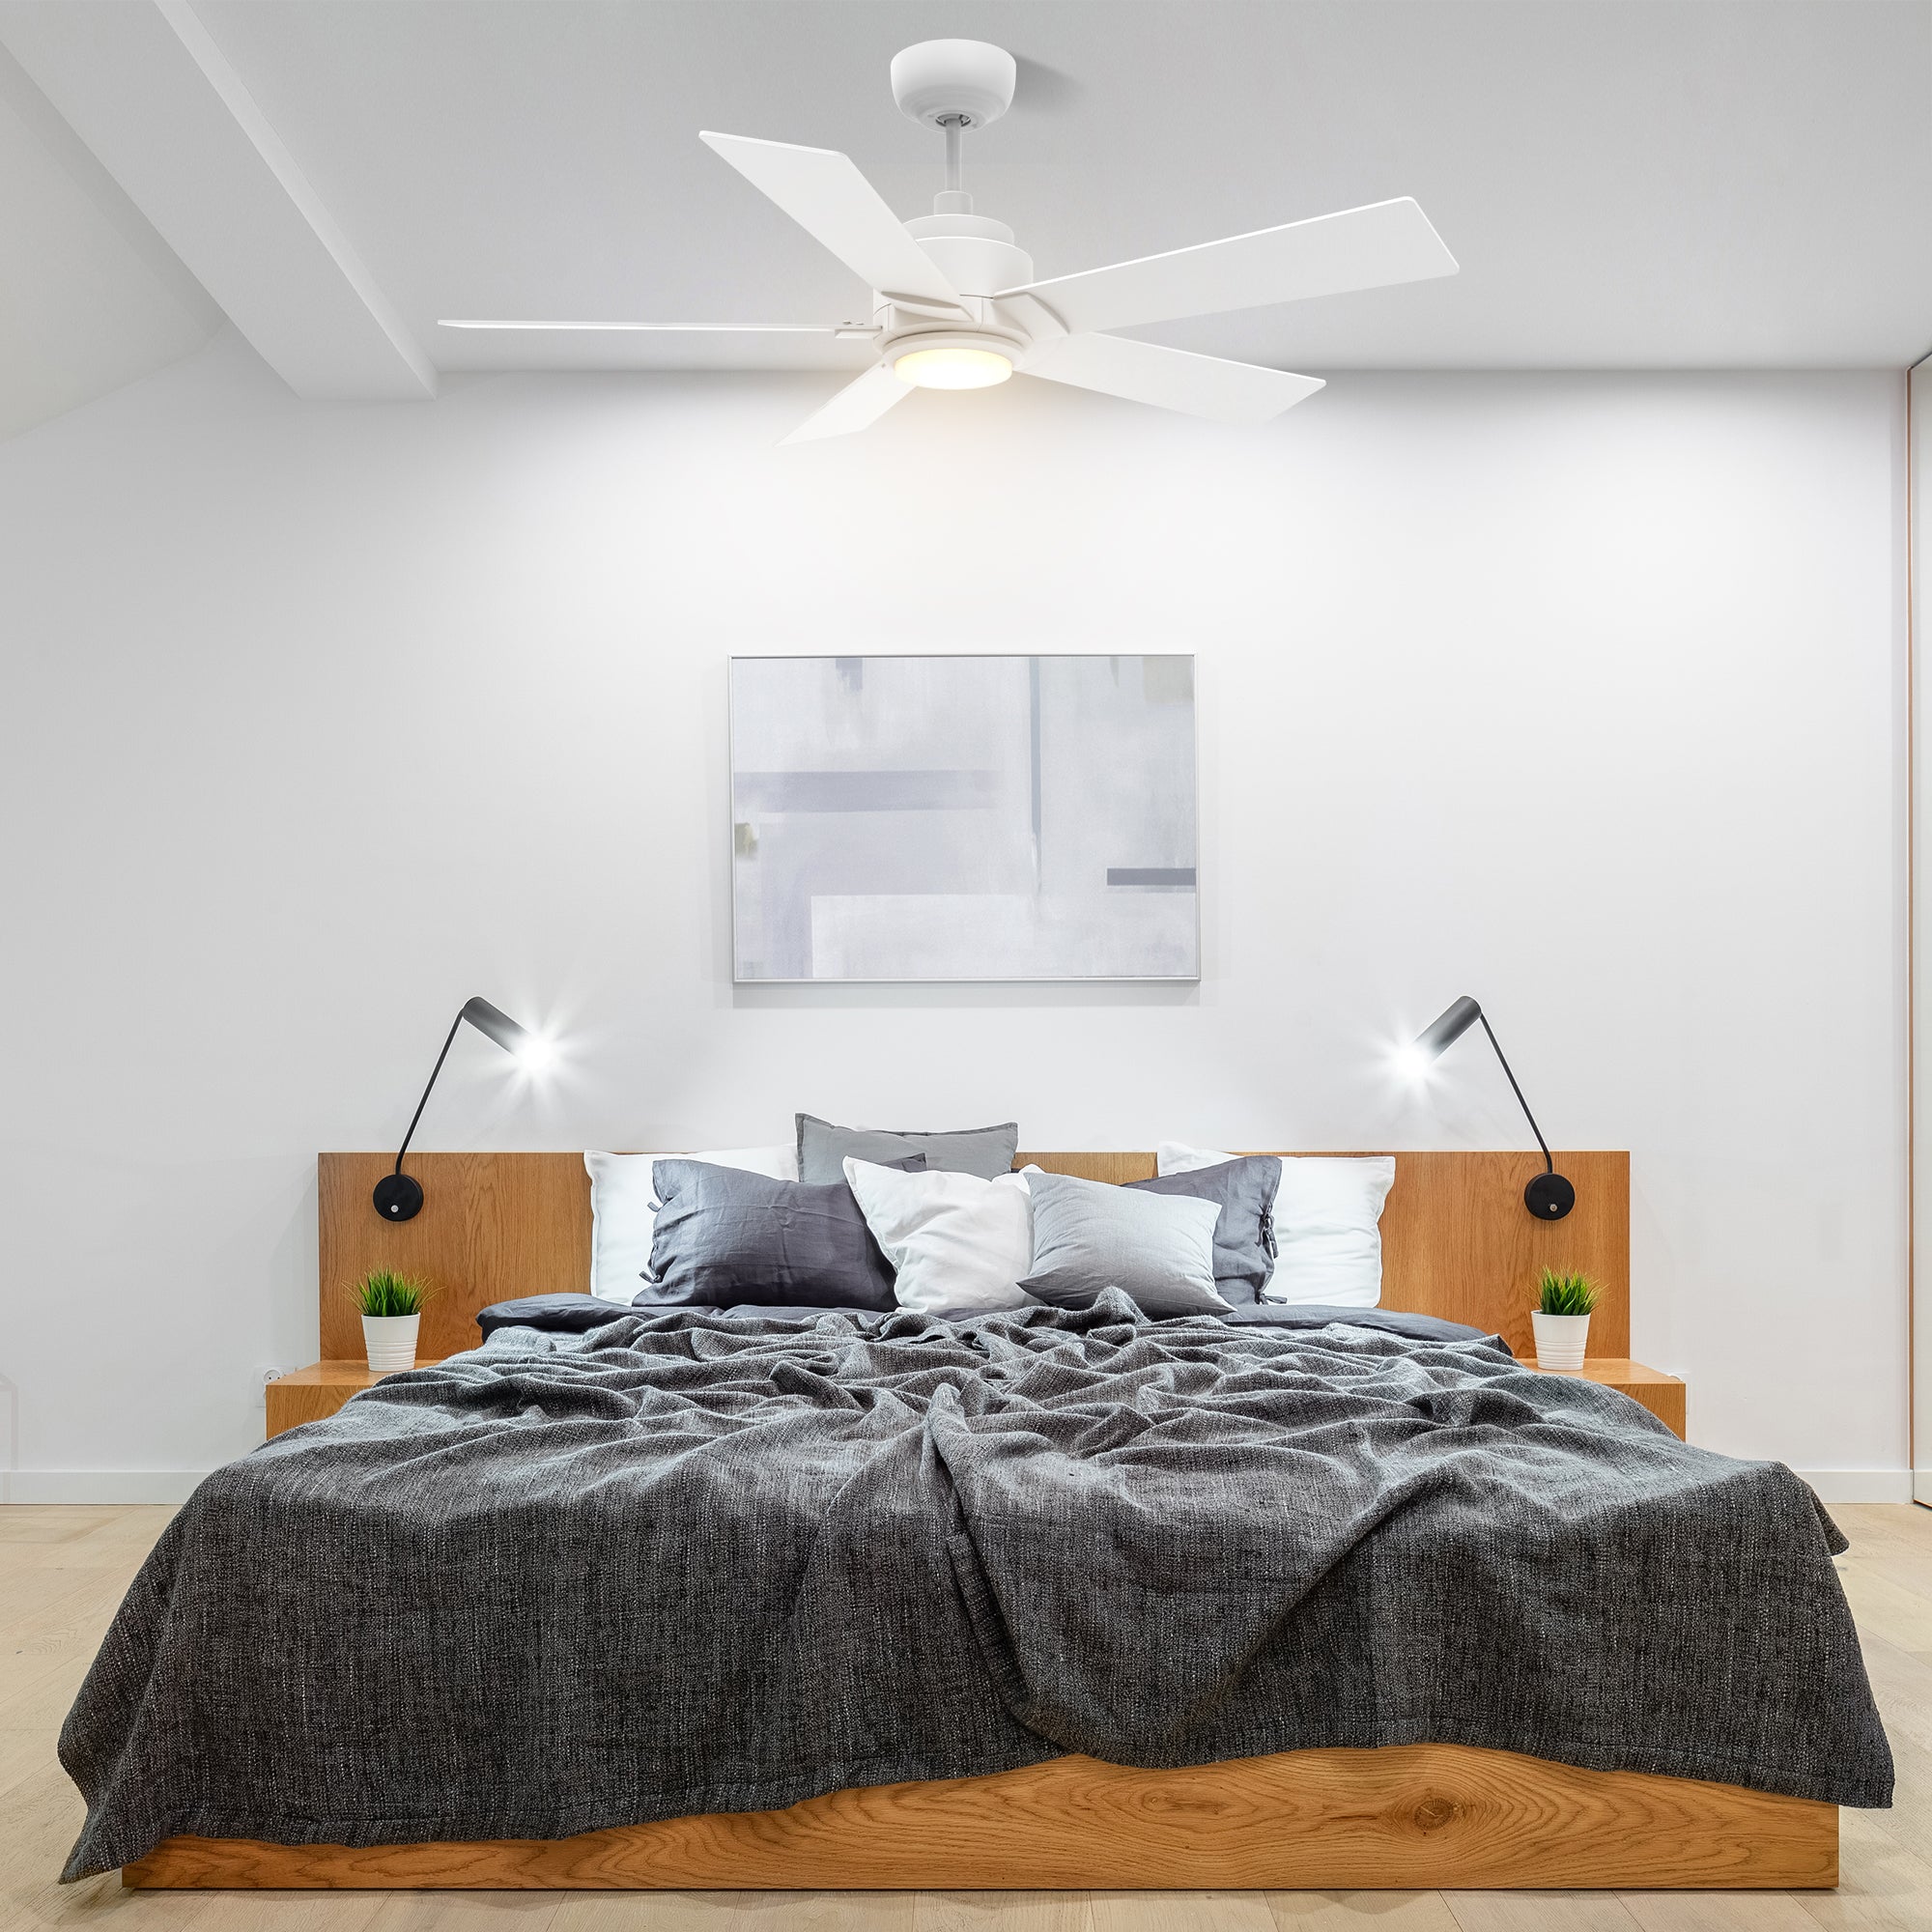 This Aspen 60&#39;&#39; smart ceiling fan keeps your space cool, bright, and stylish. It is a soft modern masterpiece perfect for your large indoor living spaces. This Wifi smart ceiling fan is a simplicity designing with White finish, use elegant Plywood blades and has an integrated 4000K LED cool light. The fan features Remote control, Wi-Fi apps, Siri Shortcut and Voice control technology (compatible with Amazon Alexa and Google Home Assistant ) to set fan preferences. 